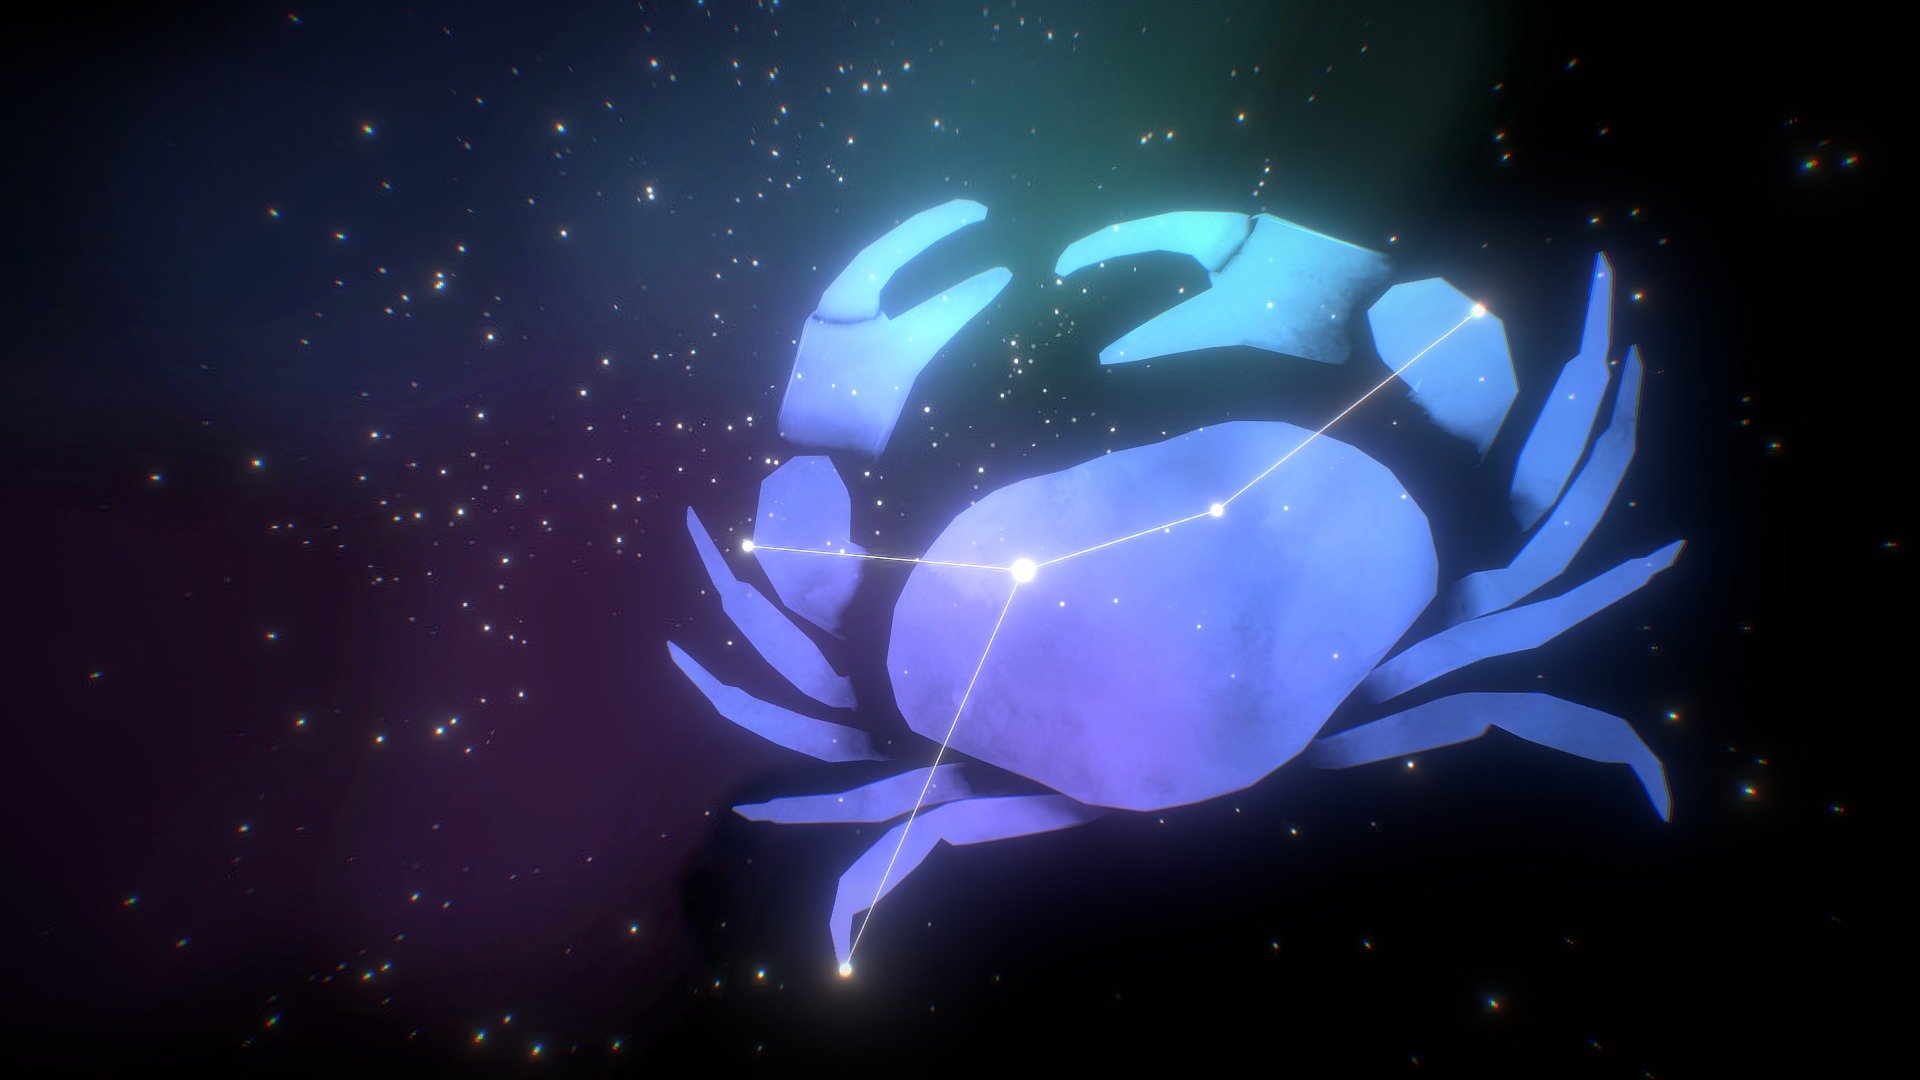 An entry for the theme &lsquo;Crab'.

I wasn't super into the idea of modelling a crab (they freak me out a bit, to be honest) so the model is definitely lacking but I had a lot of fun painting the opacity map and space background and playing with Sketchfab's super cool post-processing filters to make a funky glowy space crab :D - Giant Space Crab (AKA Cancer) - Sketchfab Weekly - 3D model by Kat (@katdeak) 3d model